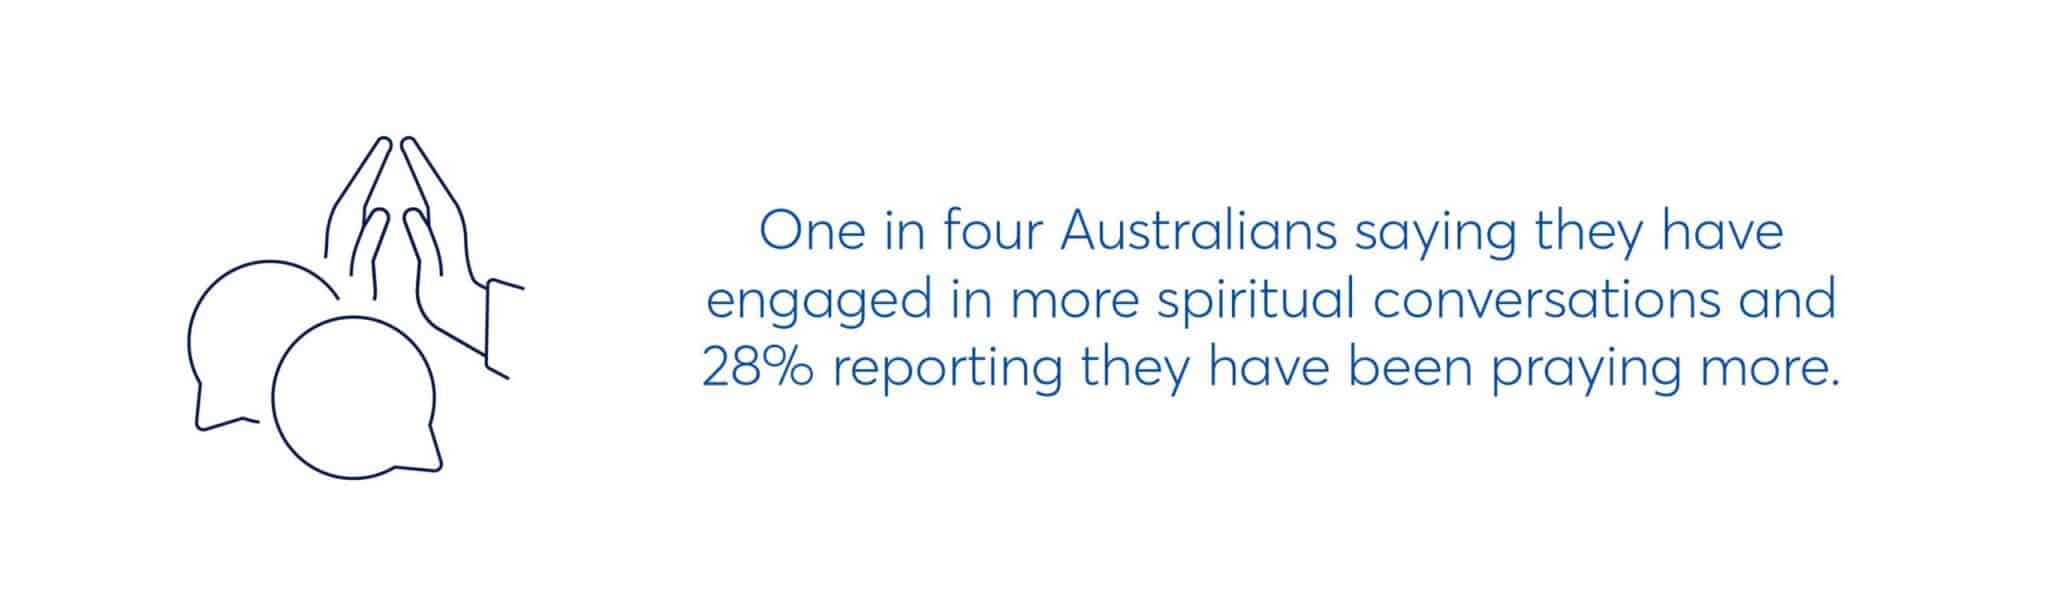 one in four australians saying they have engaged in more spiritual conversations and 28% reporting they have been praying more.